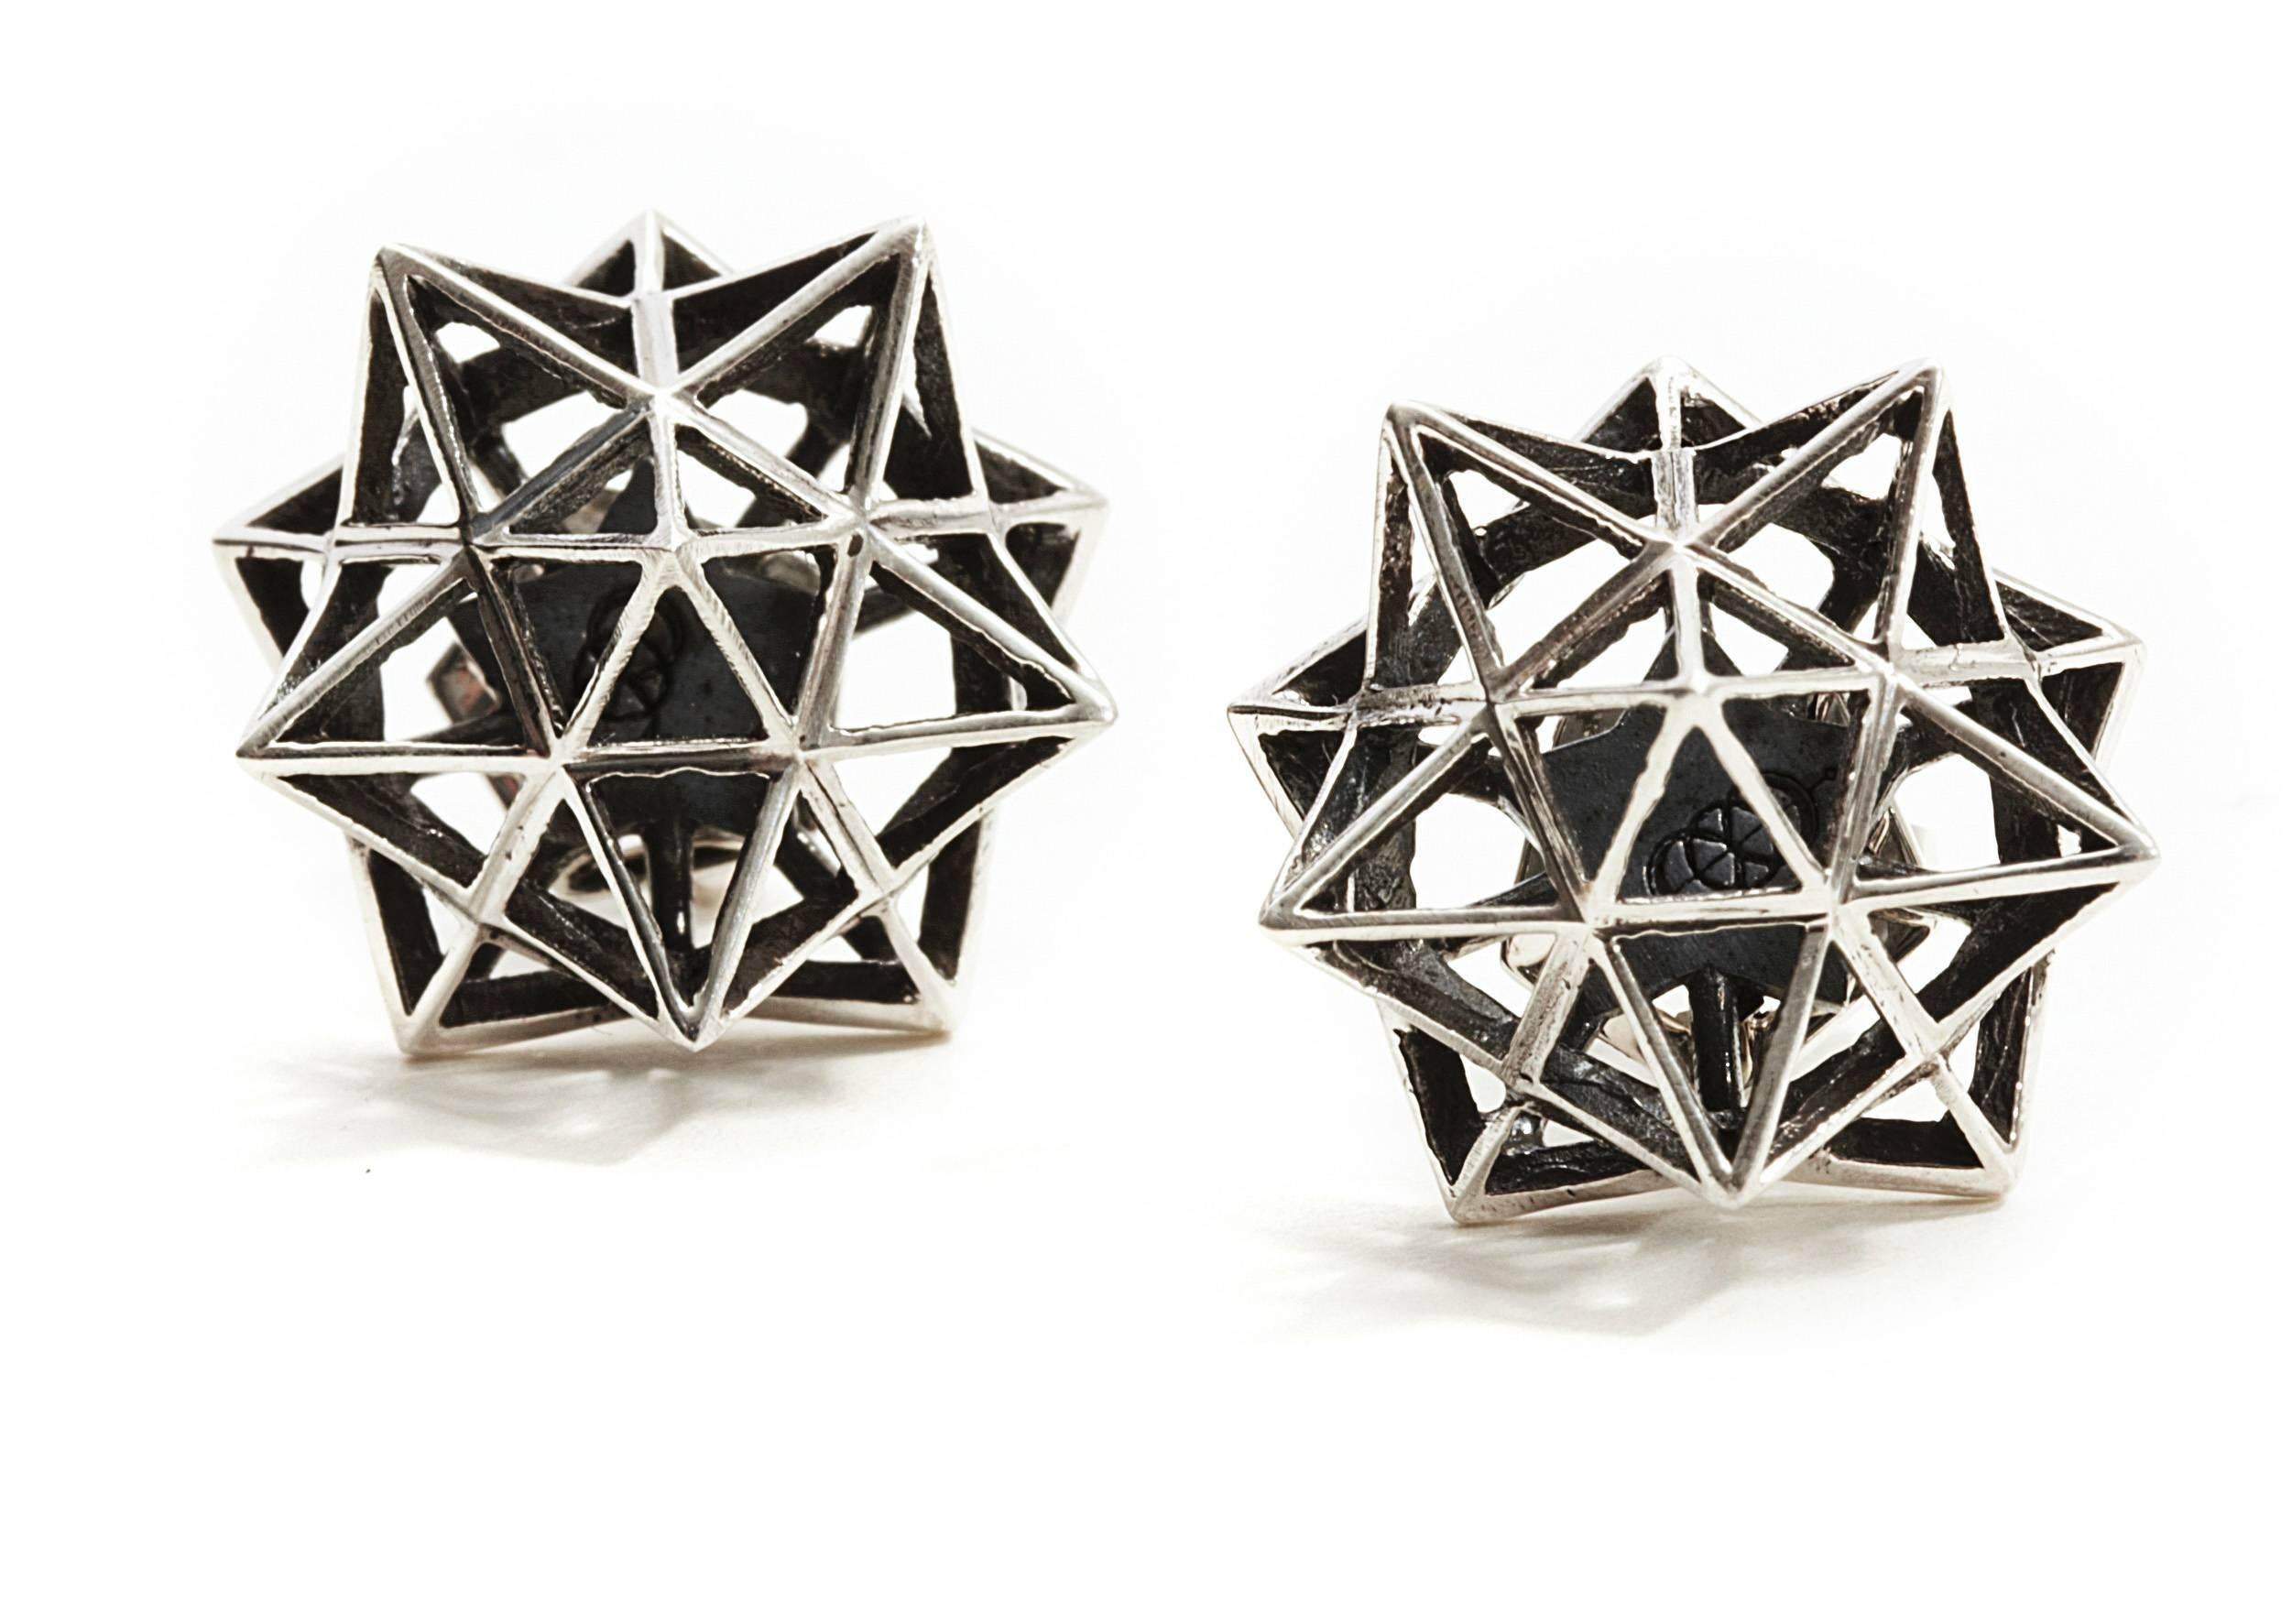 Verahedra collection stud earrings in sterling silver. These airy sculptural earrings by John Brevard are inspired by sacred geometry, namely the Star Dodecadron. The Dodecahedron represents an idealized form of divine thought, will, or idea. To